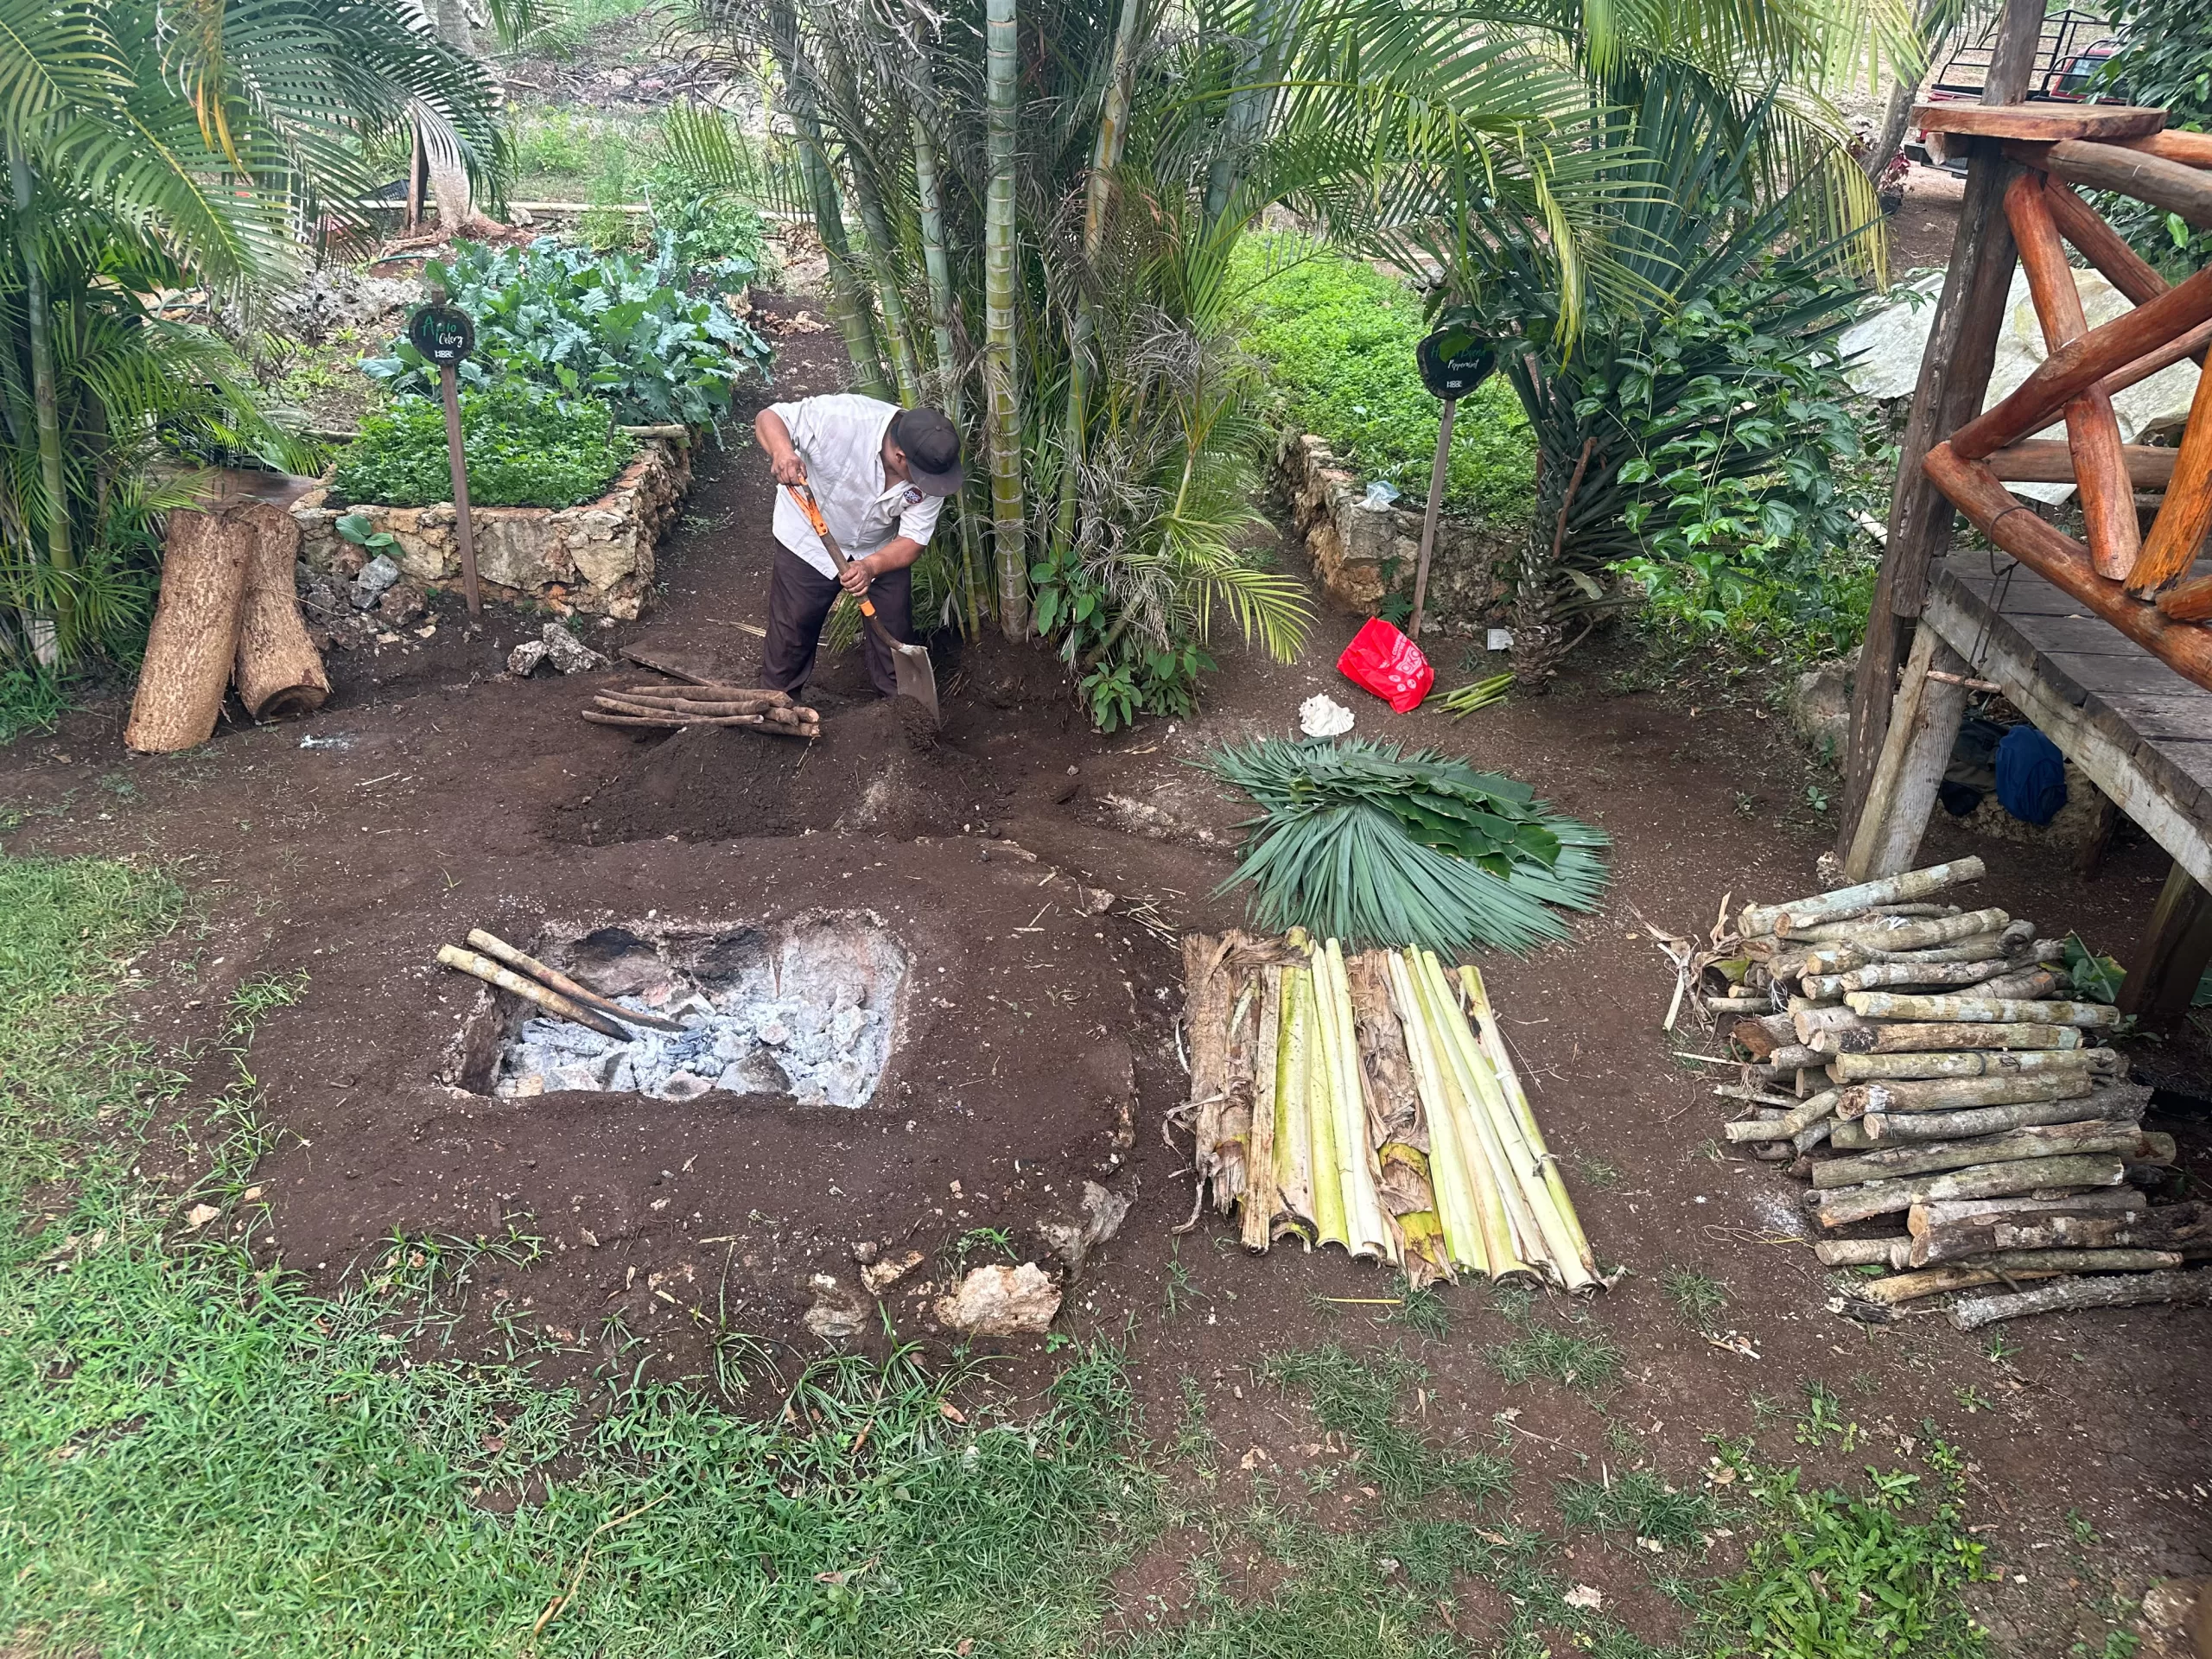 Roque preparing the Mayan pib for cooking using wood, palm fronds, and other natural materials.